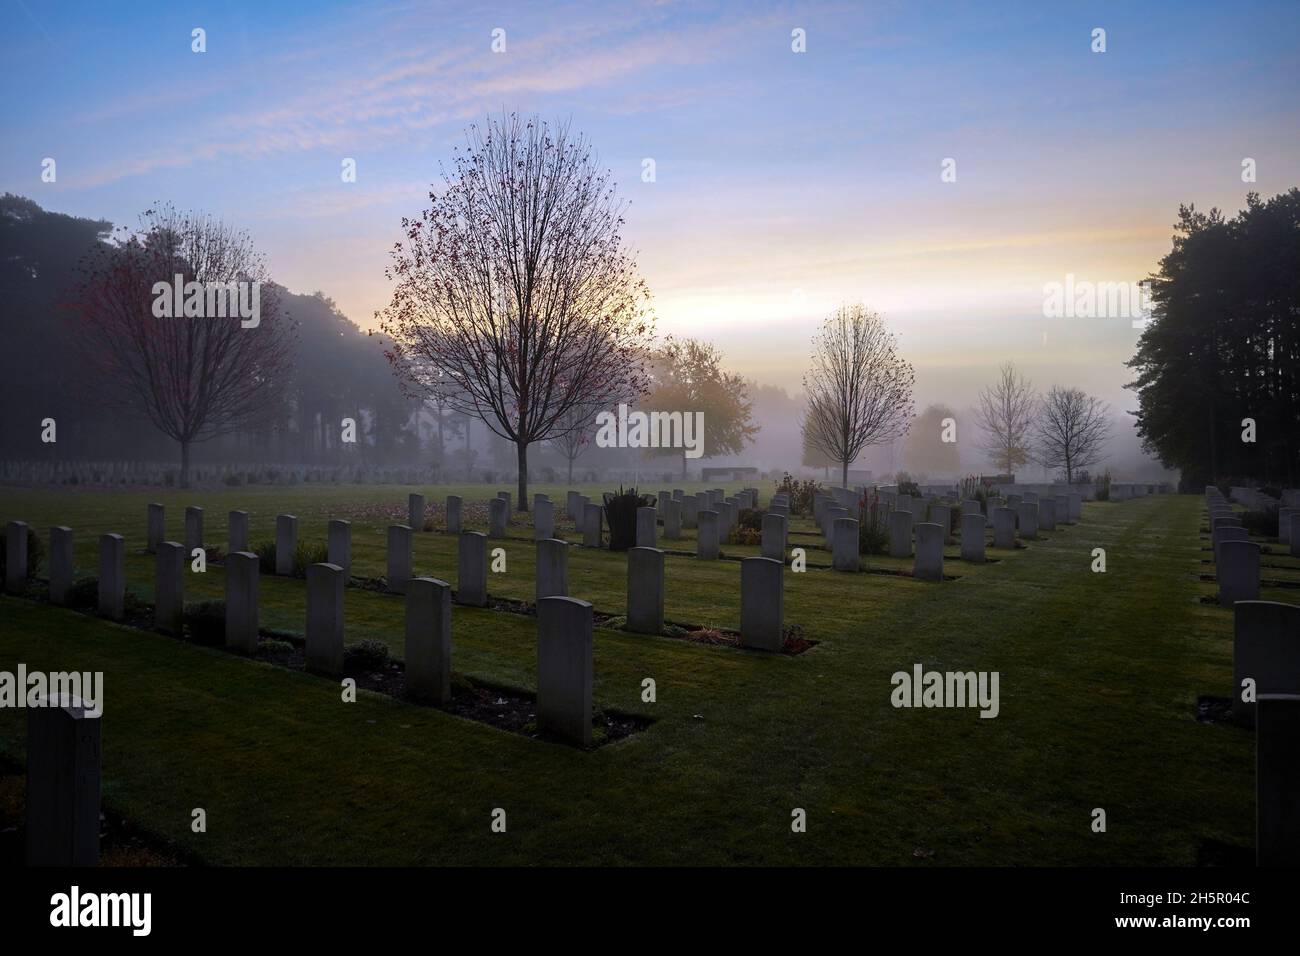 Sunrise on Armistice Day over First and Second World War graves at the Commonwealth War Graves Commission's Brookwood Military Cemetery in Woking Surrey. People across the UK will observe a two minute silence at 11 o'clock to remember the war dead. Picture date: Thursday November 11, 2021. Stock Photo